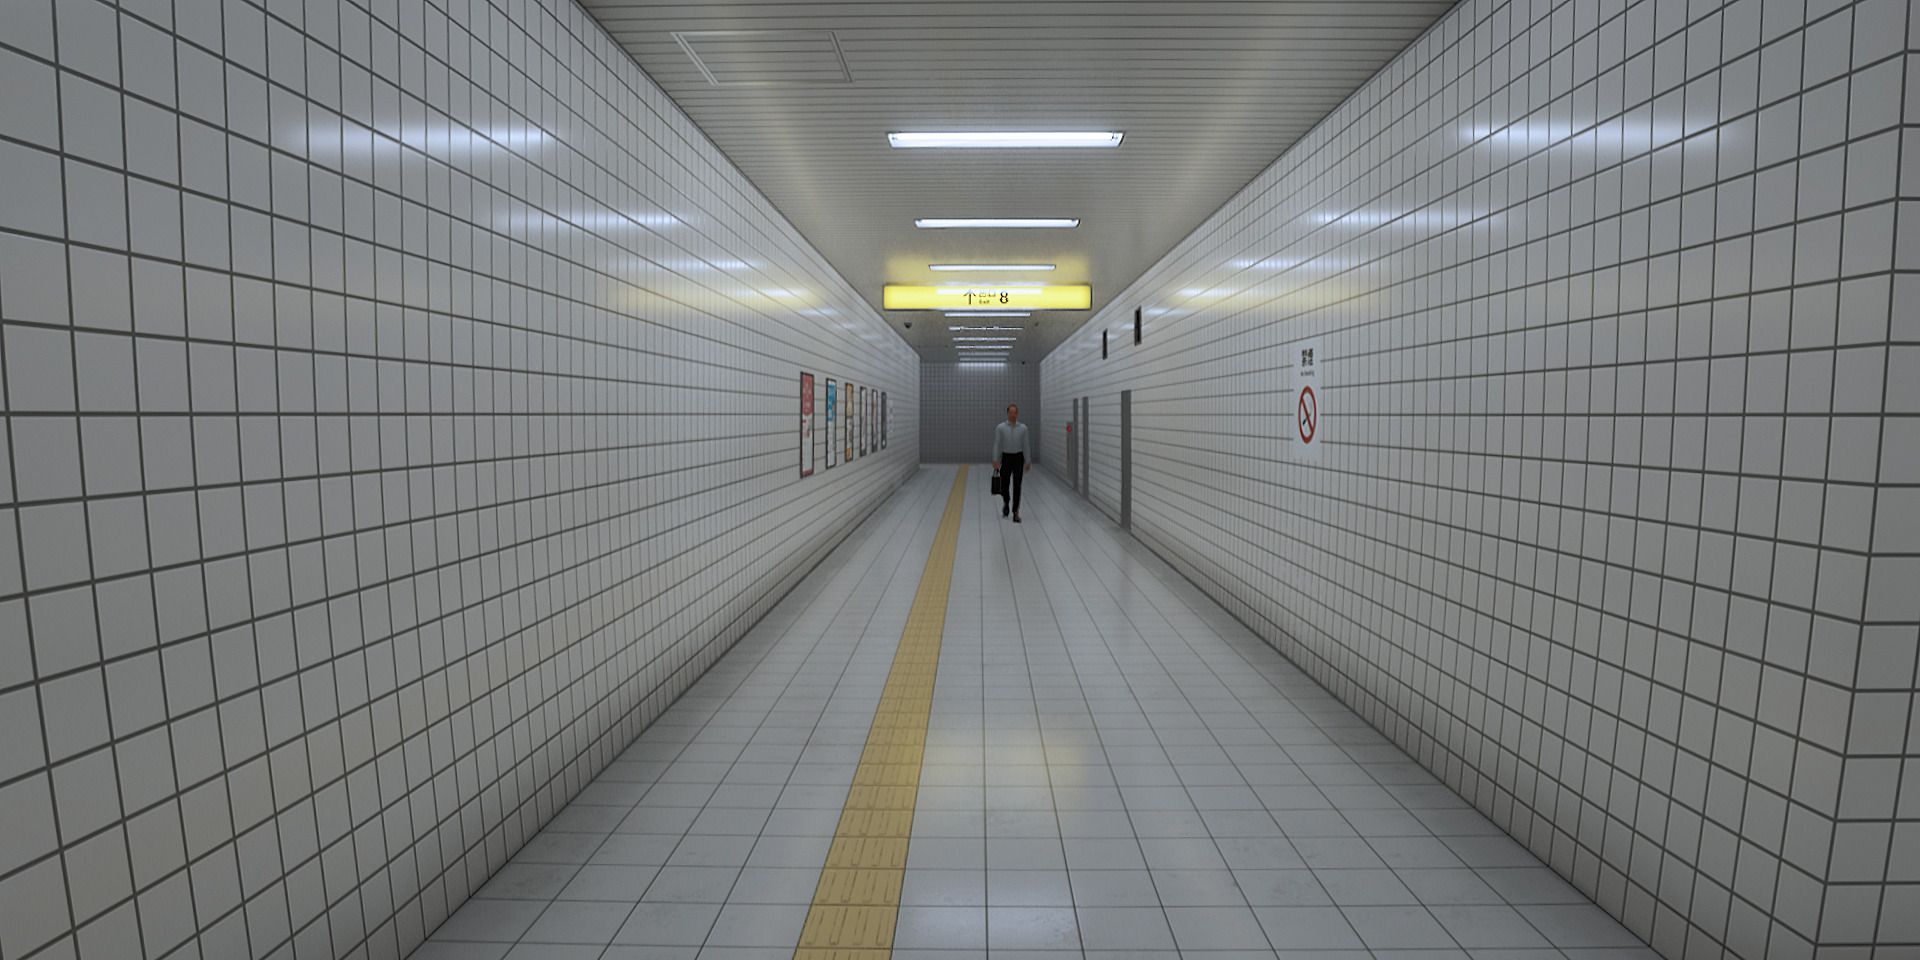 Image of the main hallway with the walking man in The Exit 8